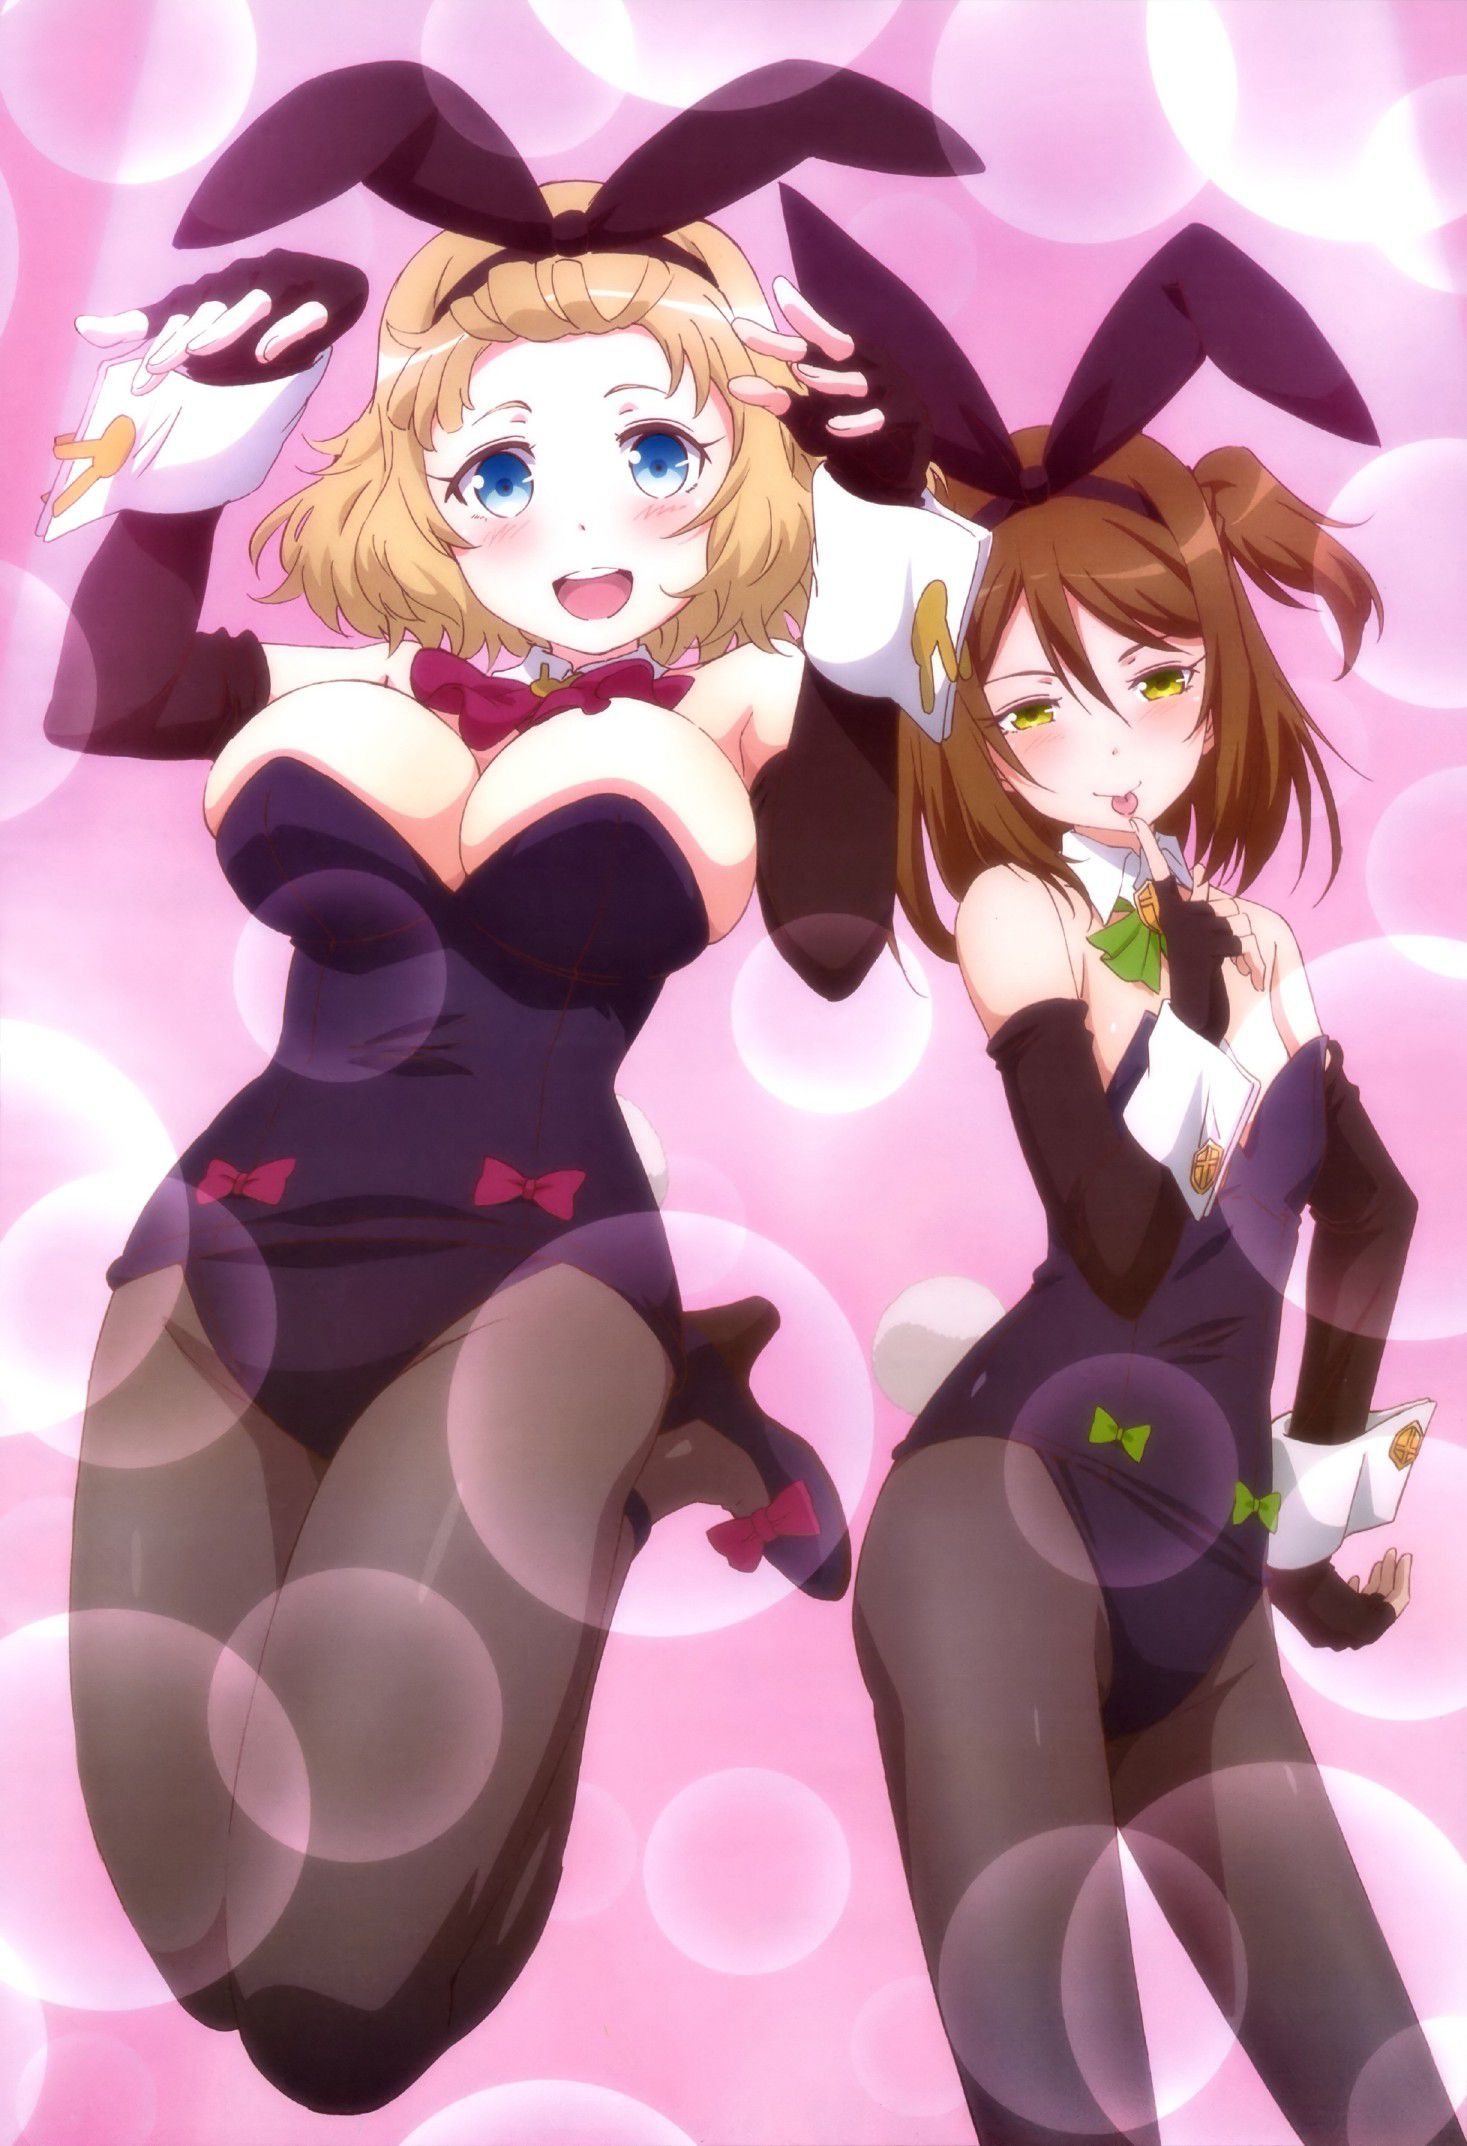 【Secondary erotic】 The secondary dosquebe image of a girl dressed in a bunny girl costume that stands out for the dosukebe of the buttocks and pie is here 25